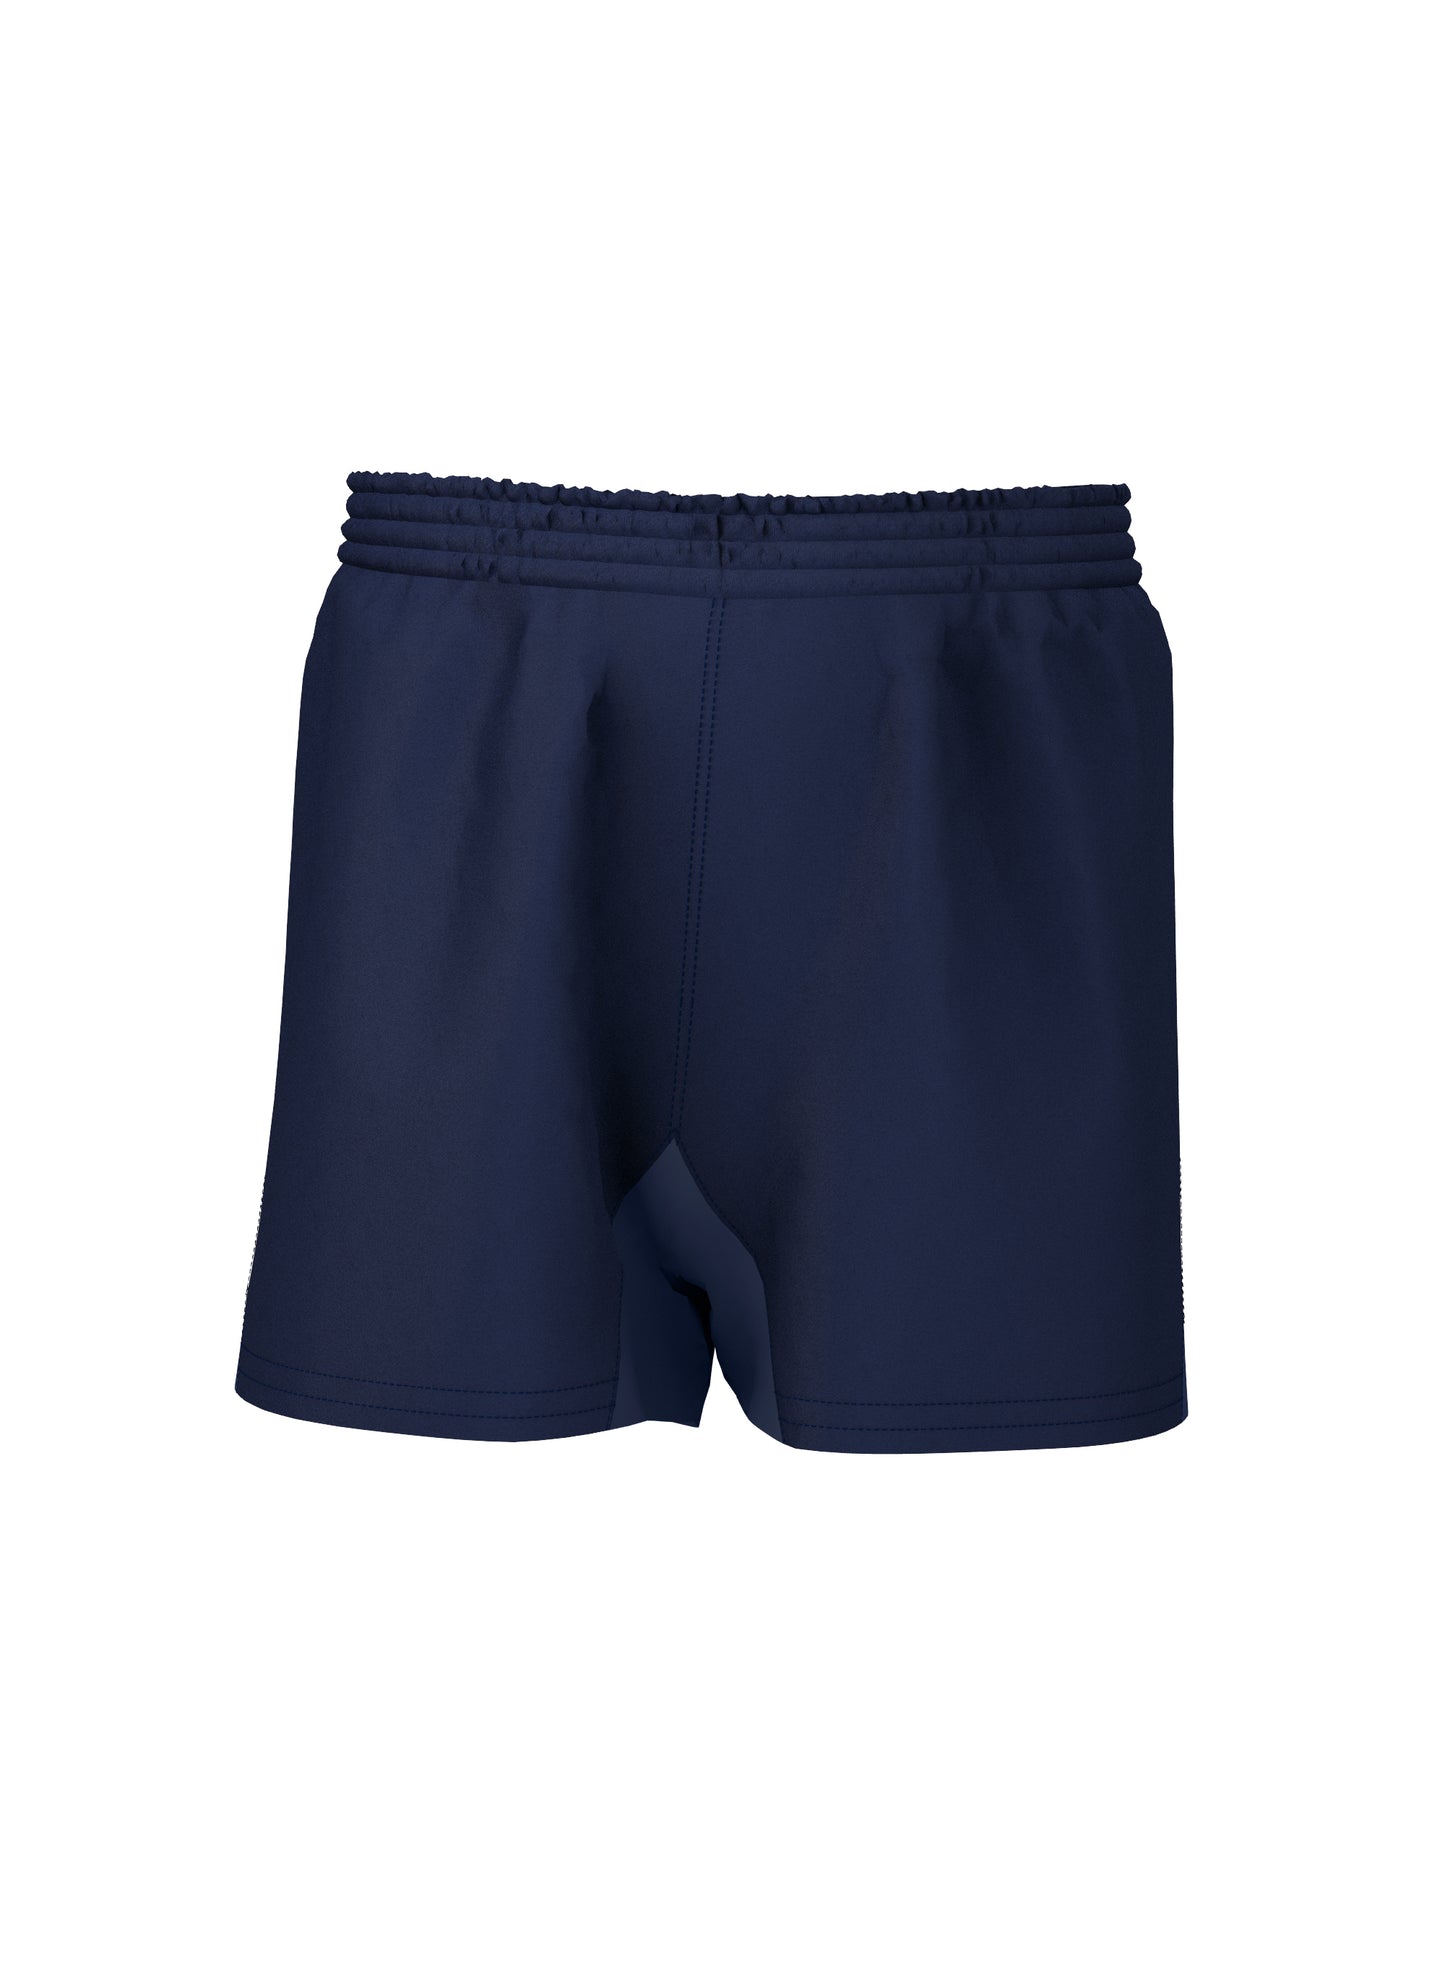 PRO RUGBY SHORT NAVY